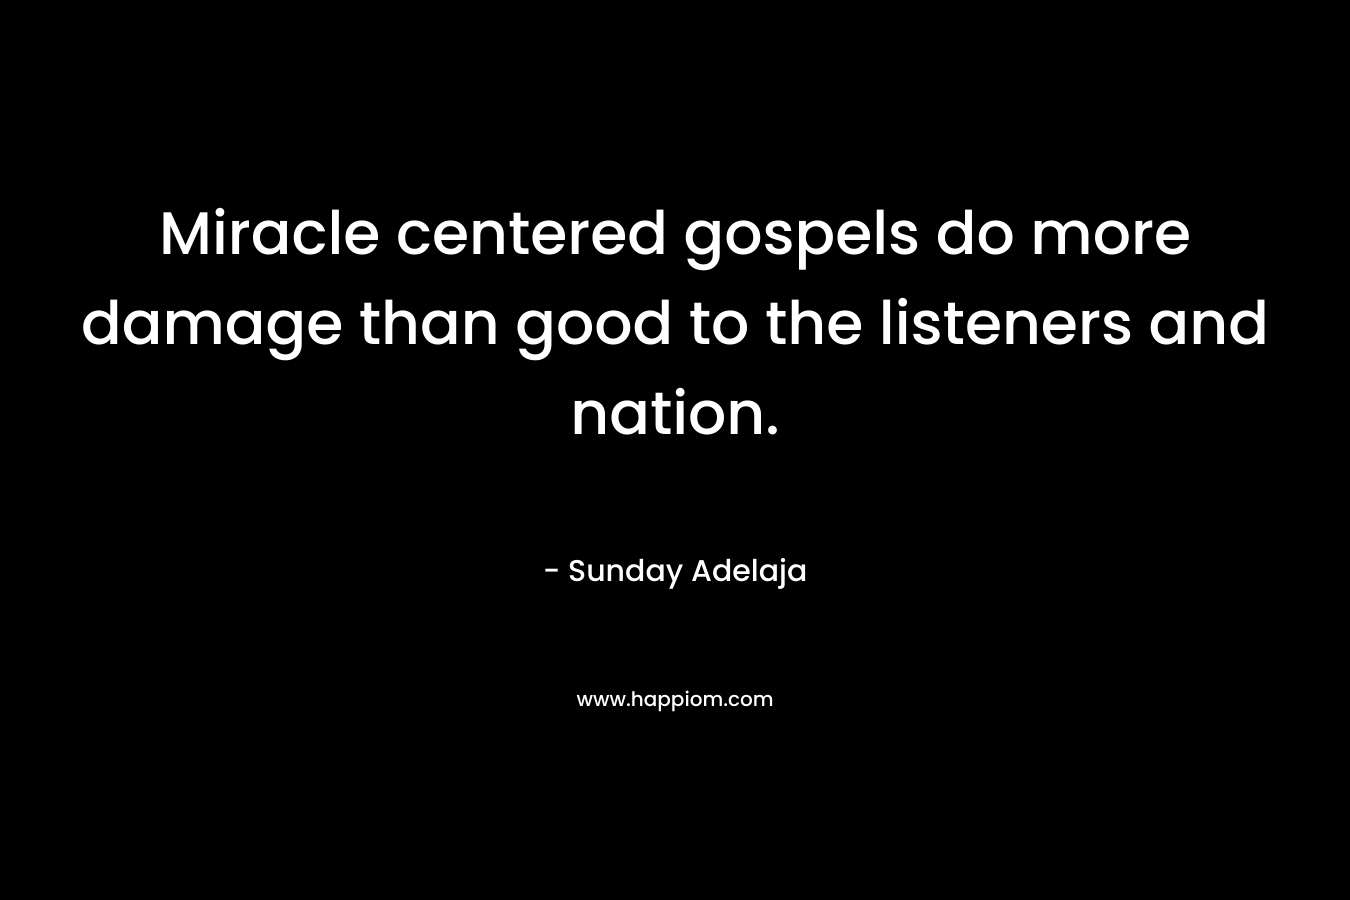 Miracle centered gospels do more damage than good to the listeners and nation. – Sunday Adelaja